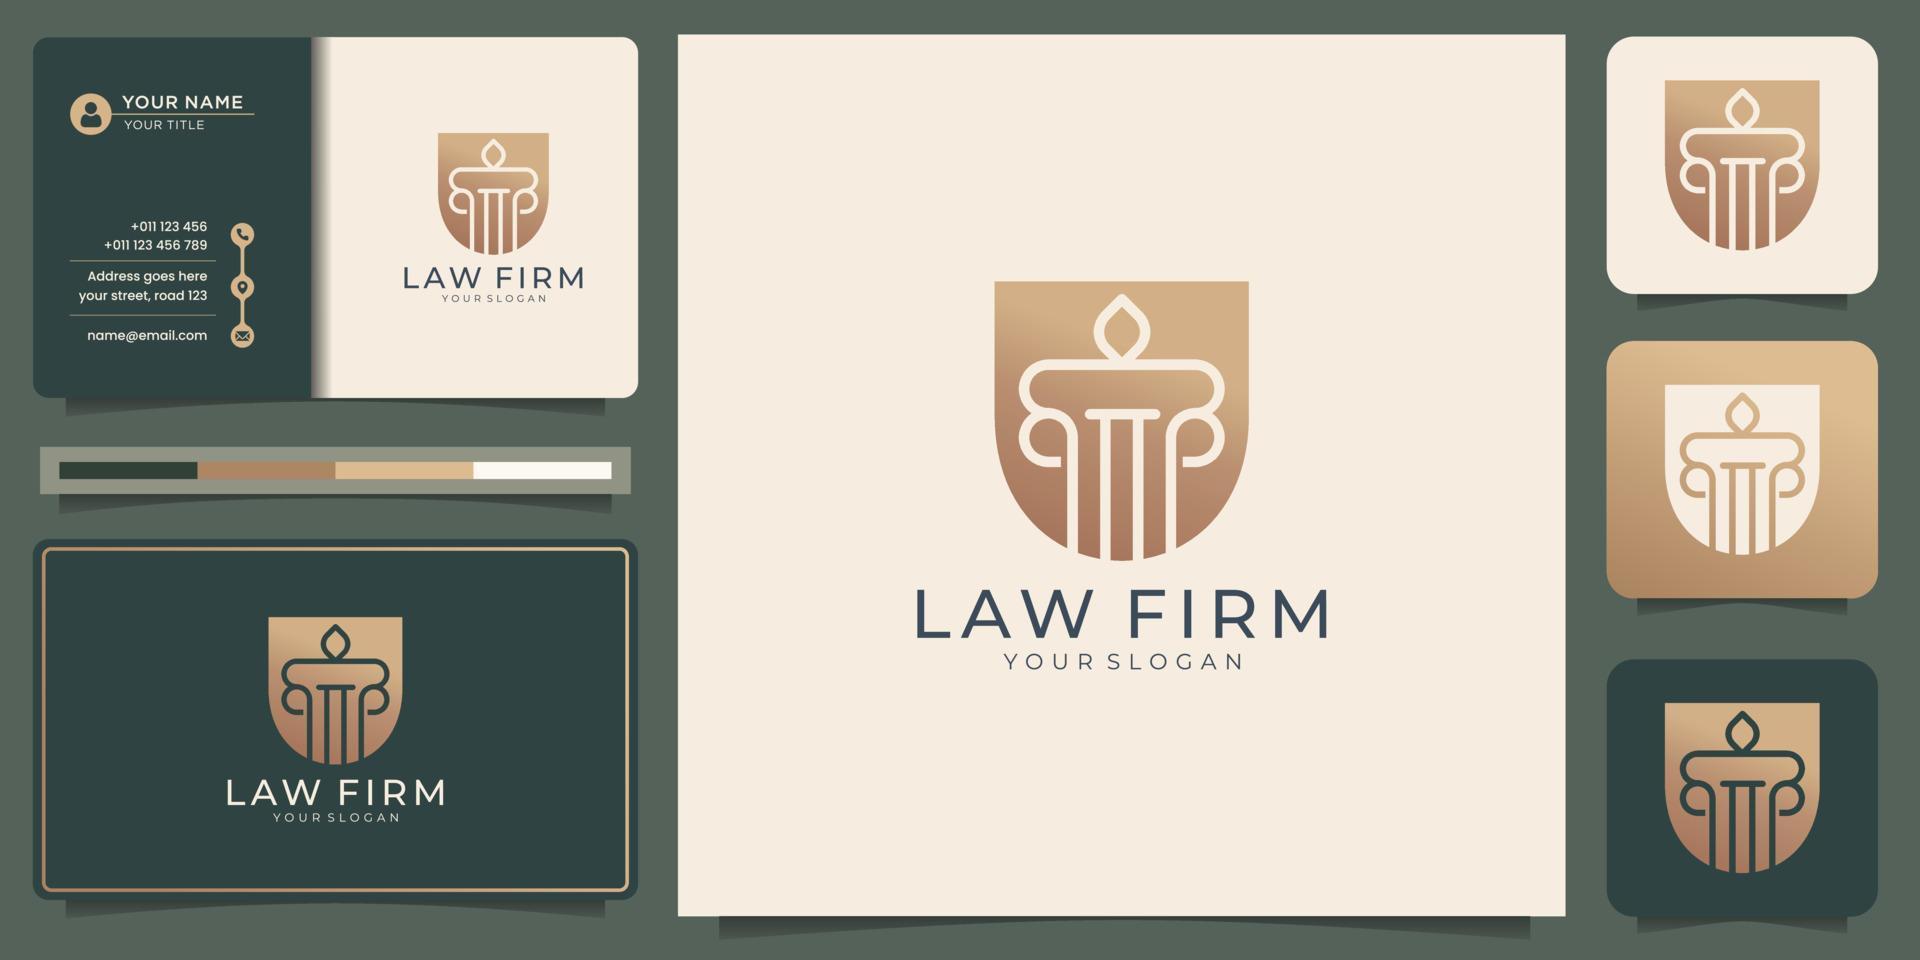 law firm logo and business card template gold. logo can be used as brand,identity, consulting. vector